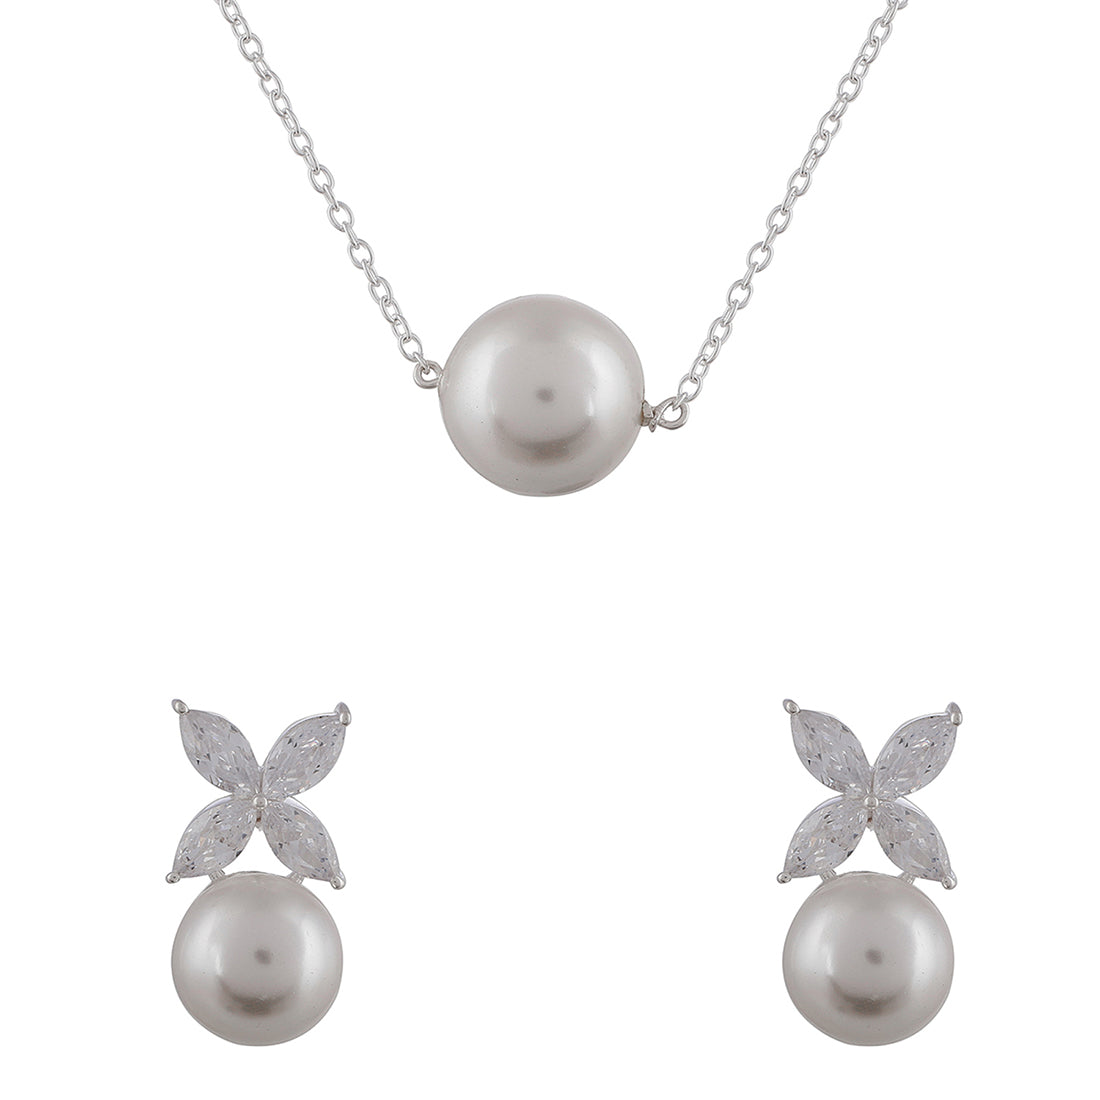 925 Sterling Silver Floral Necklace Set with Pearl Drops